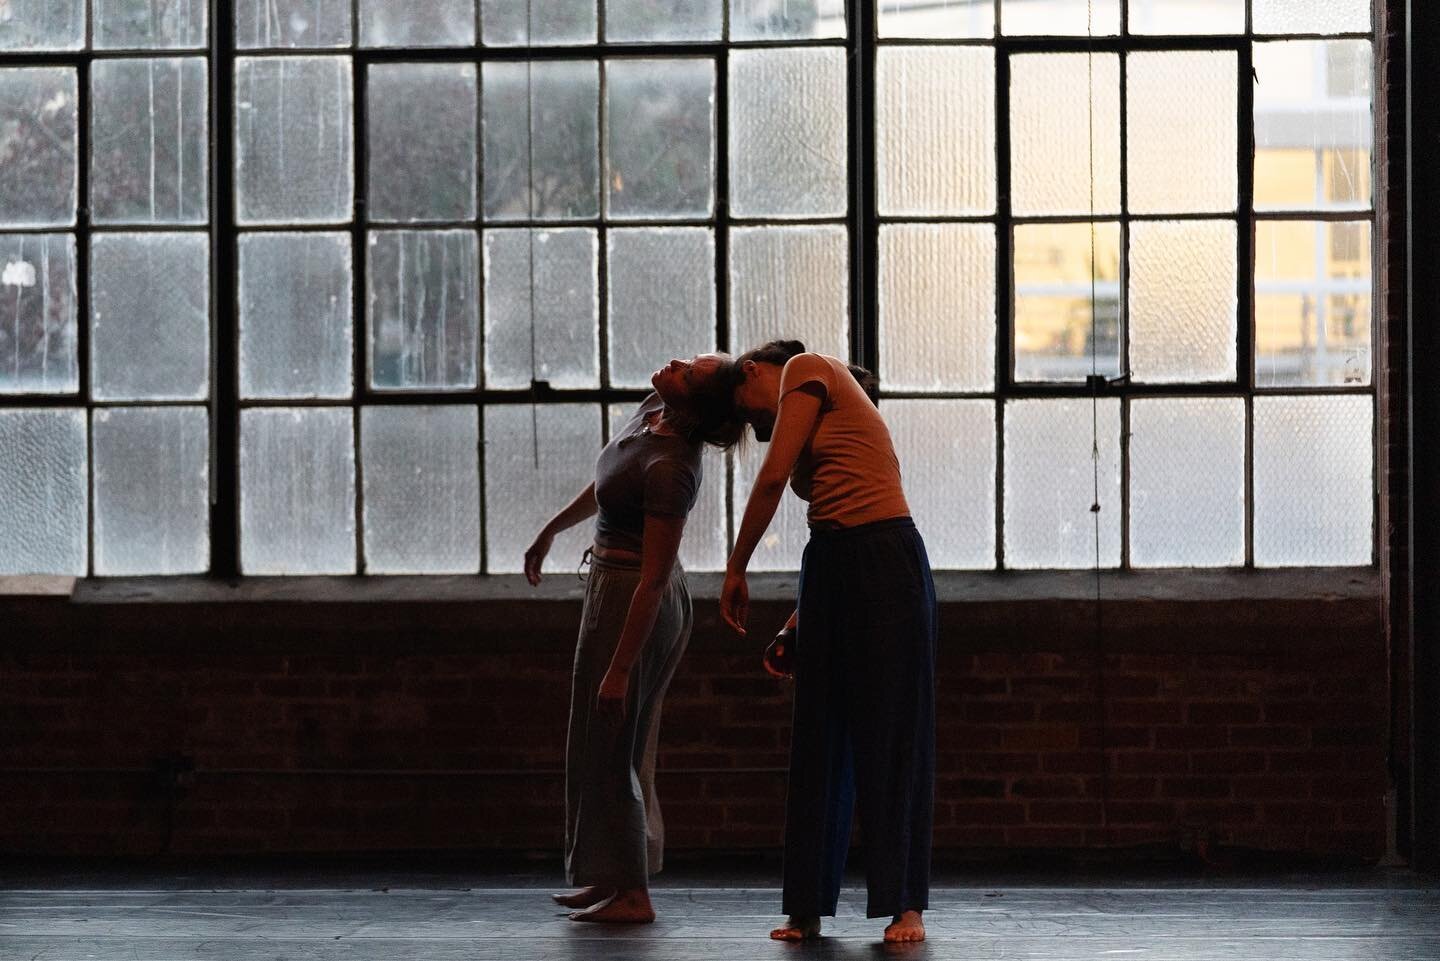 Nominated for Visual Design, Aura Fischbeck (concept/direction) and Beth Hersh (lighting design), Dusk, a dance for the time when the light is fading, choreography by Aura Fischbeck, Aura Fischbeck Dance, Joe Goode Annex, San Francisco
@aurafischbeck